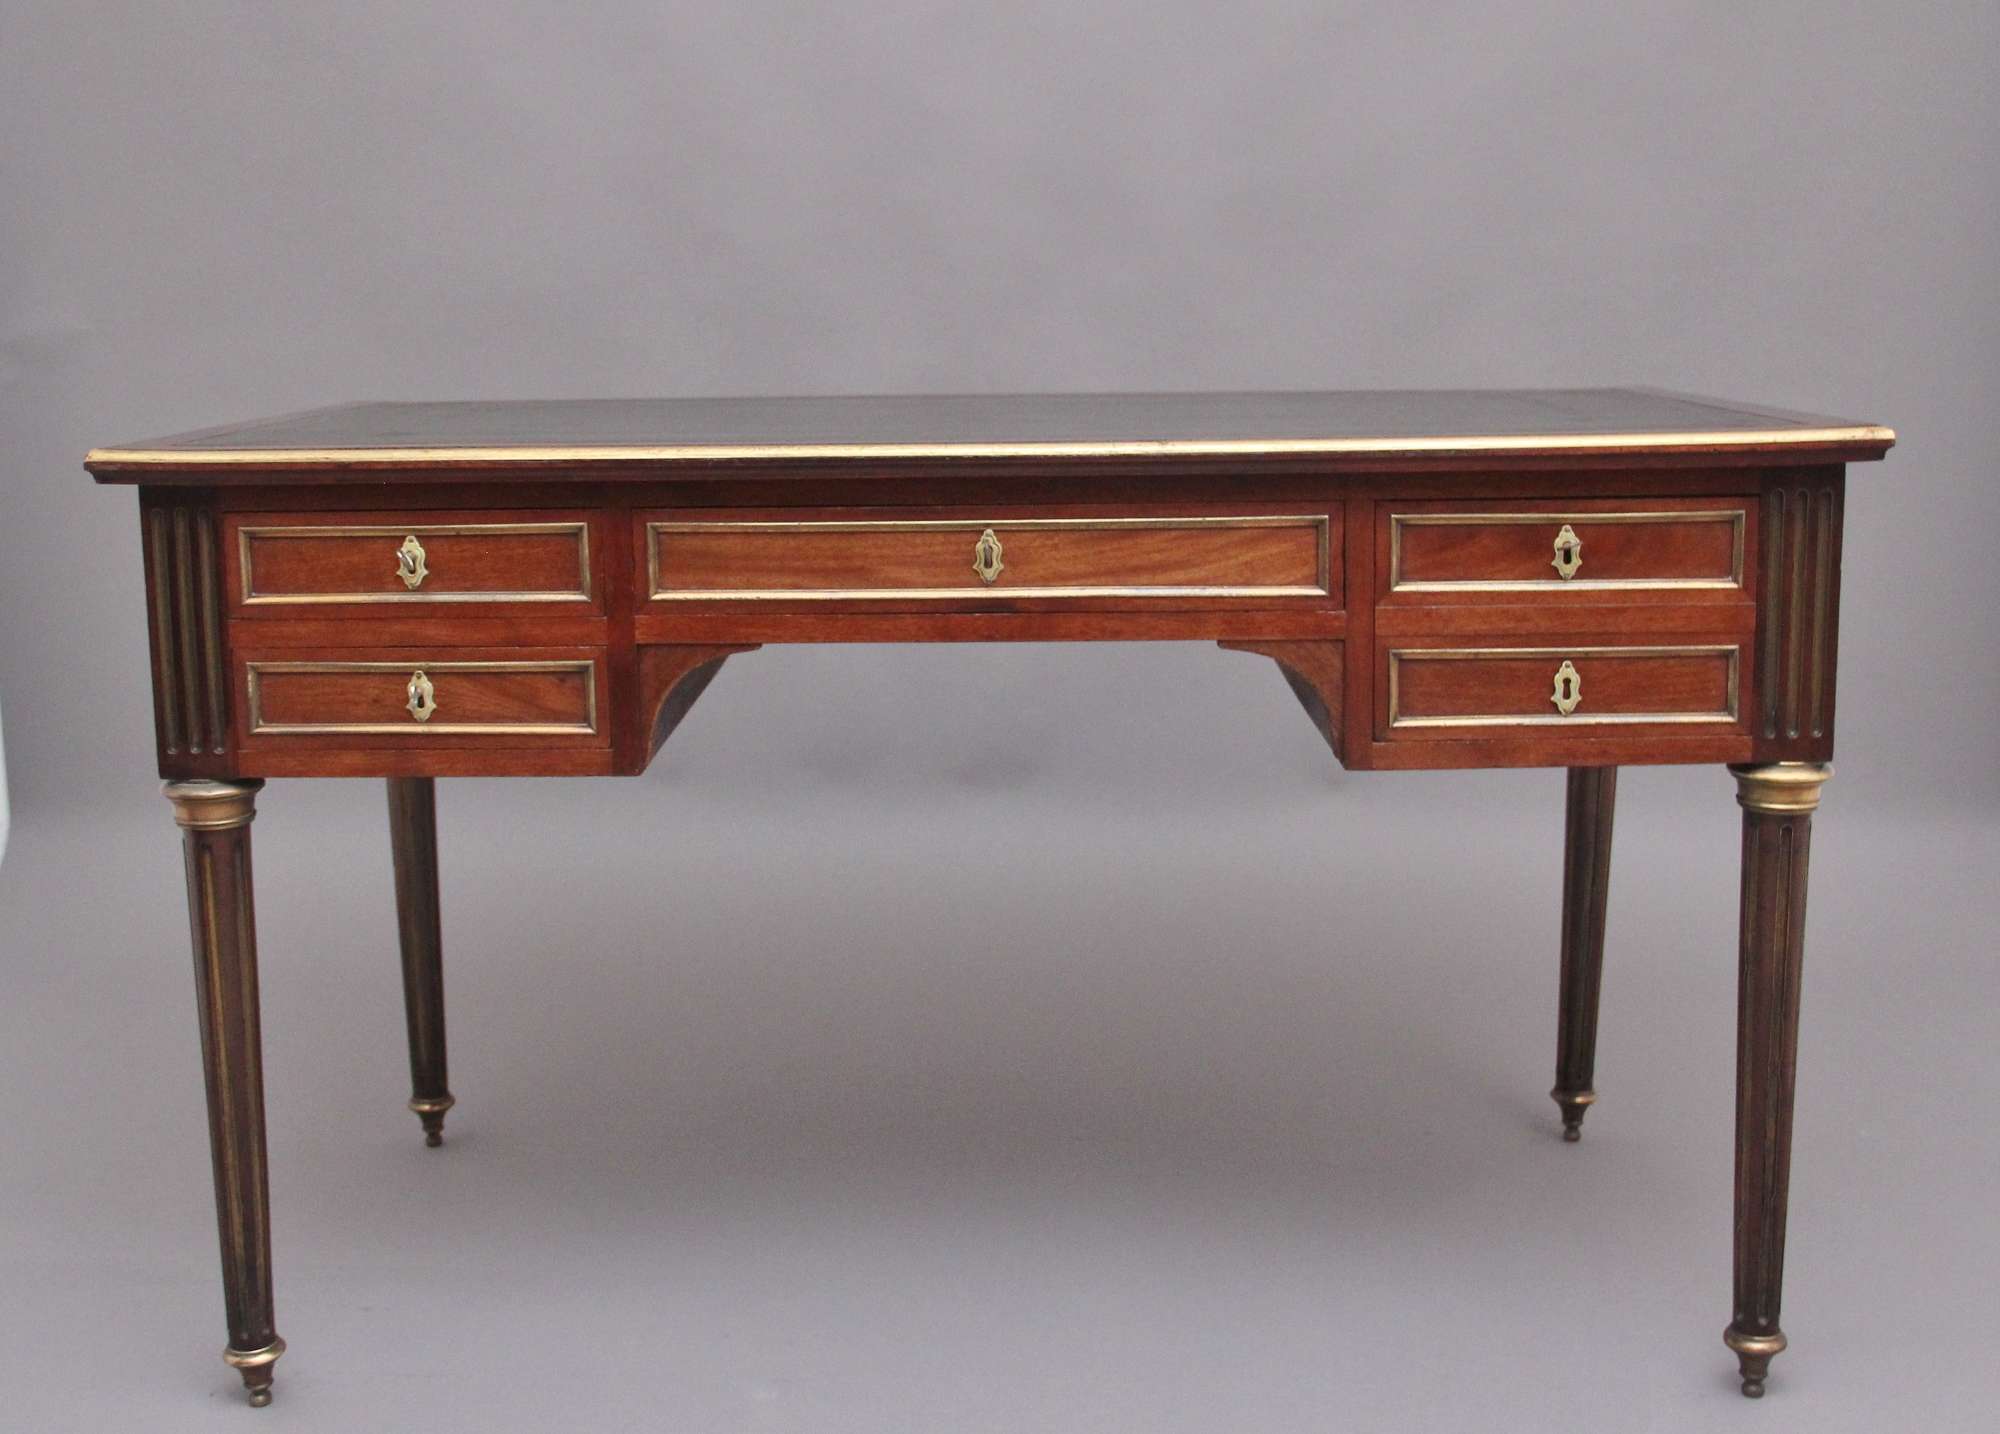 19th Century French Mahogany And Brass Inlaid Directoire Writing Desk